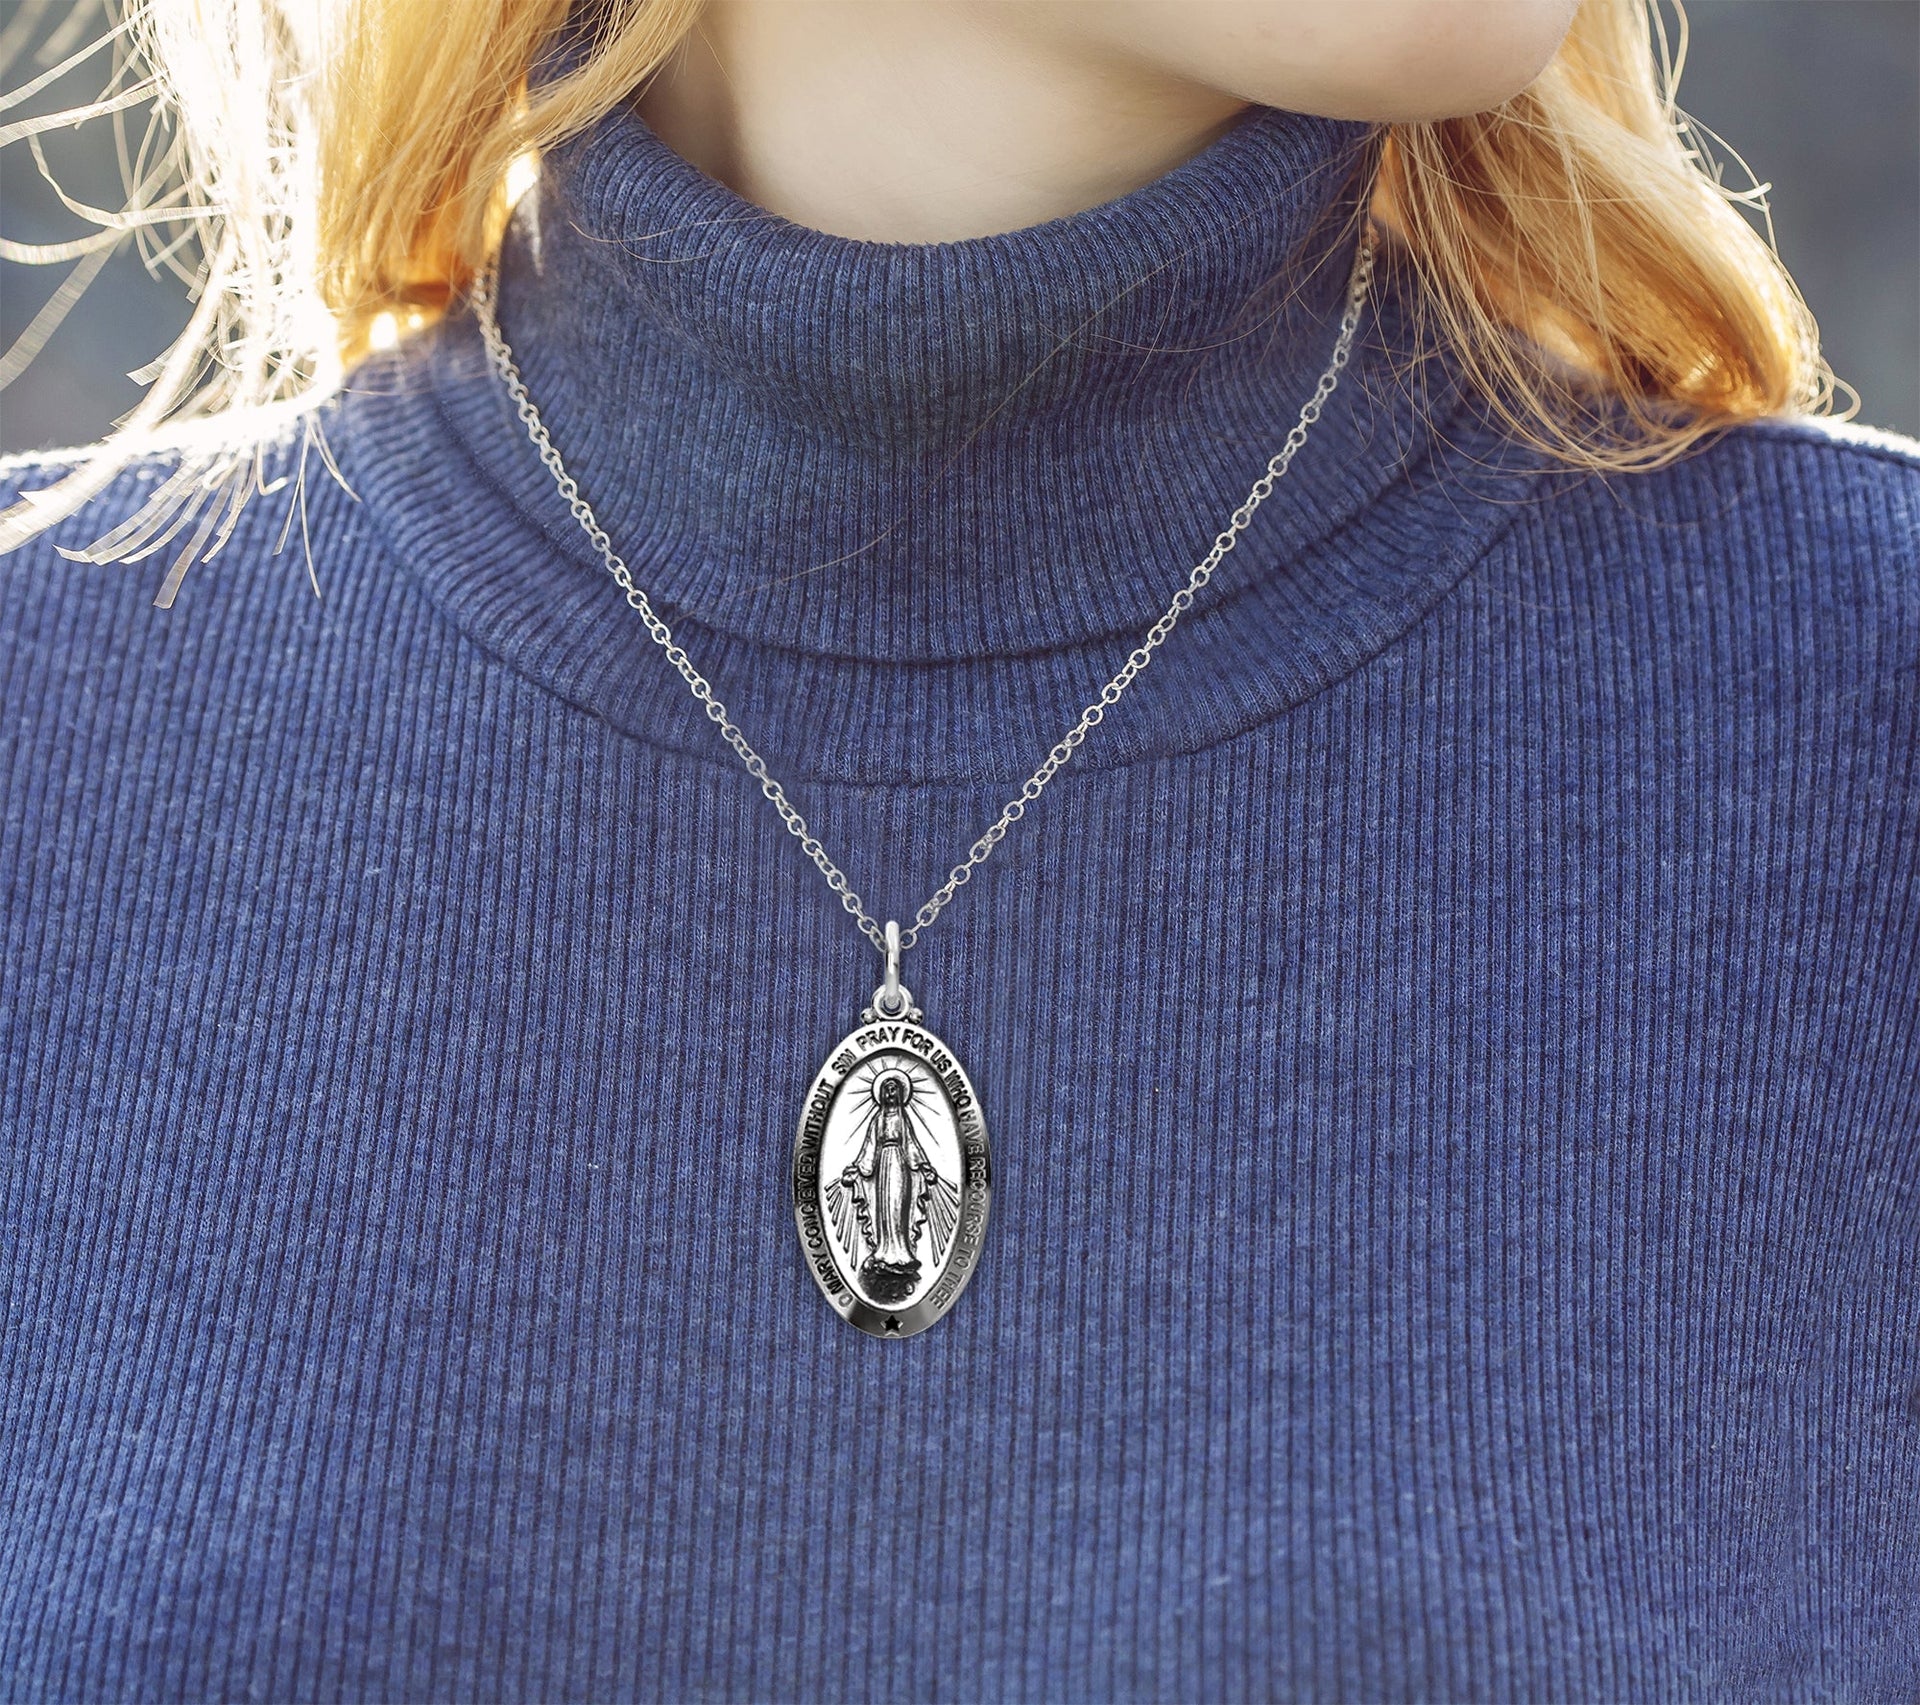 Ladies 925 Sterling Silver Large Miraculous Virgin Mary Antiqued Pendant Necklace, 32mm - US Jewels